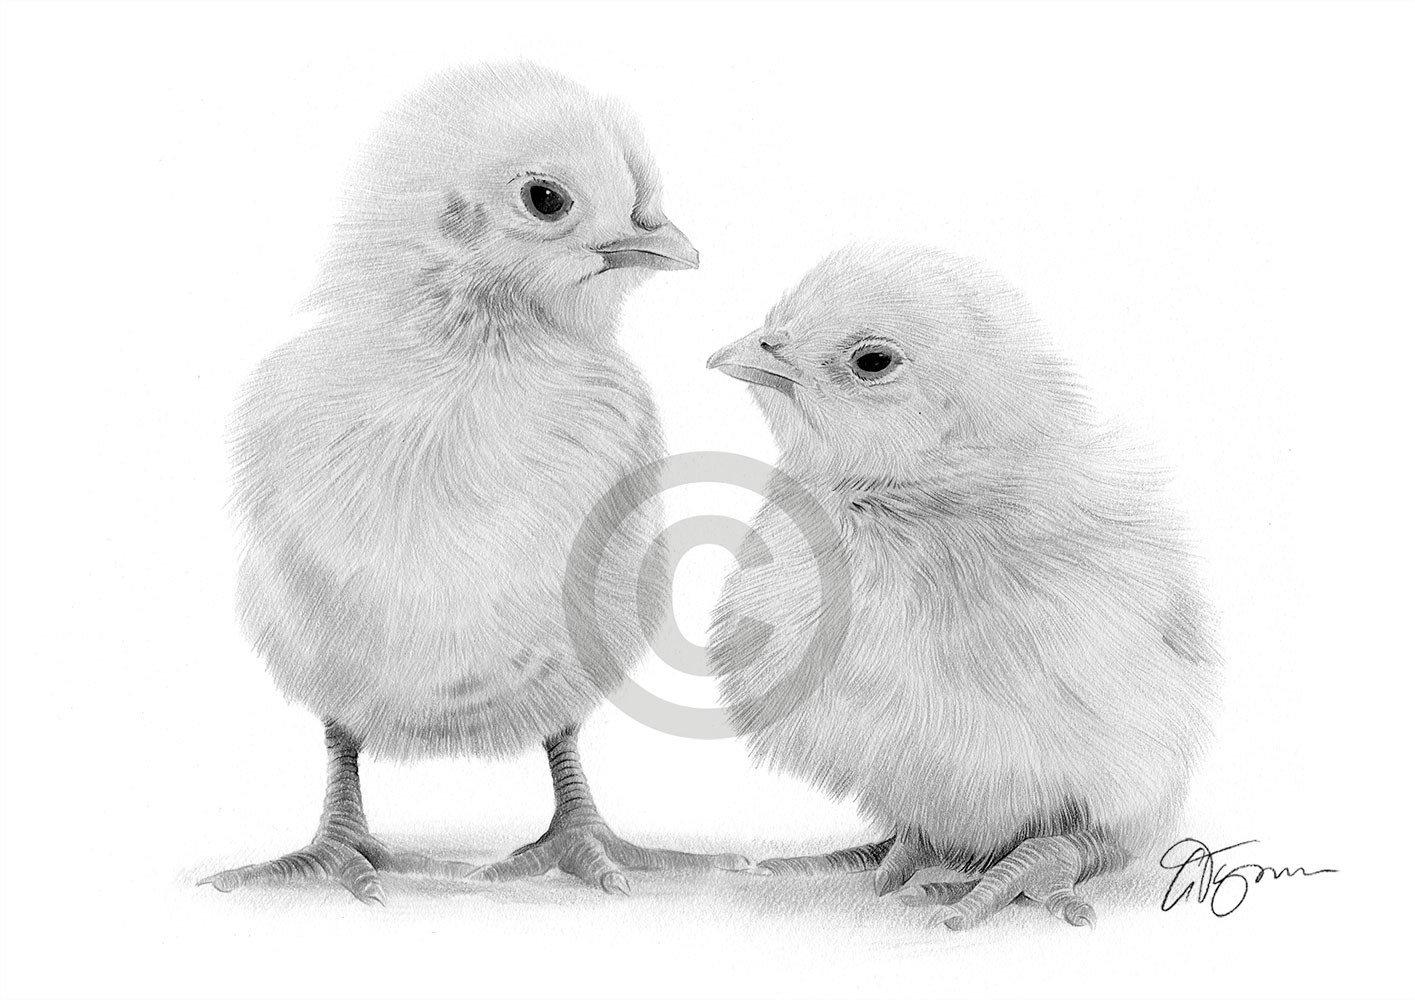 Pencil drawing of young chicks by artist Gary Tymon